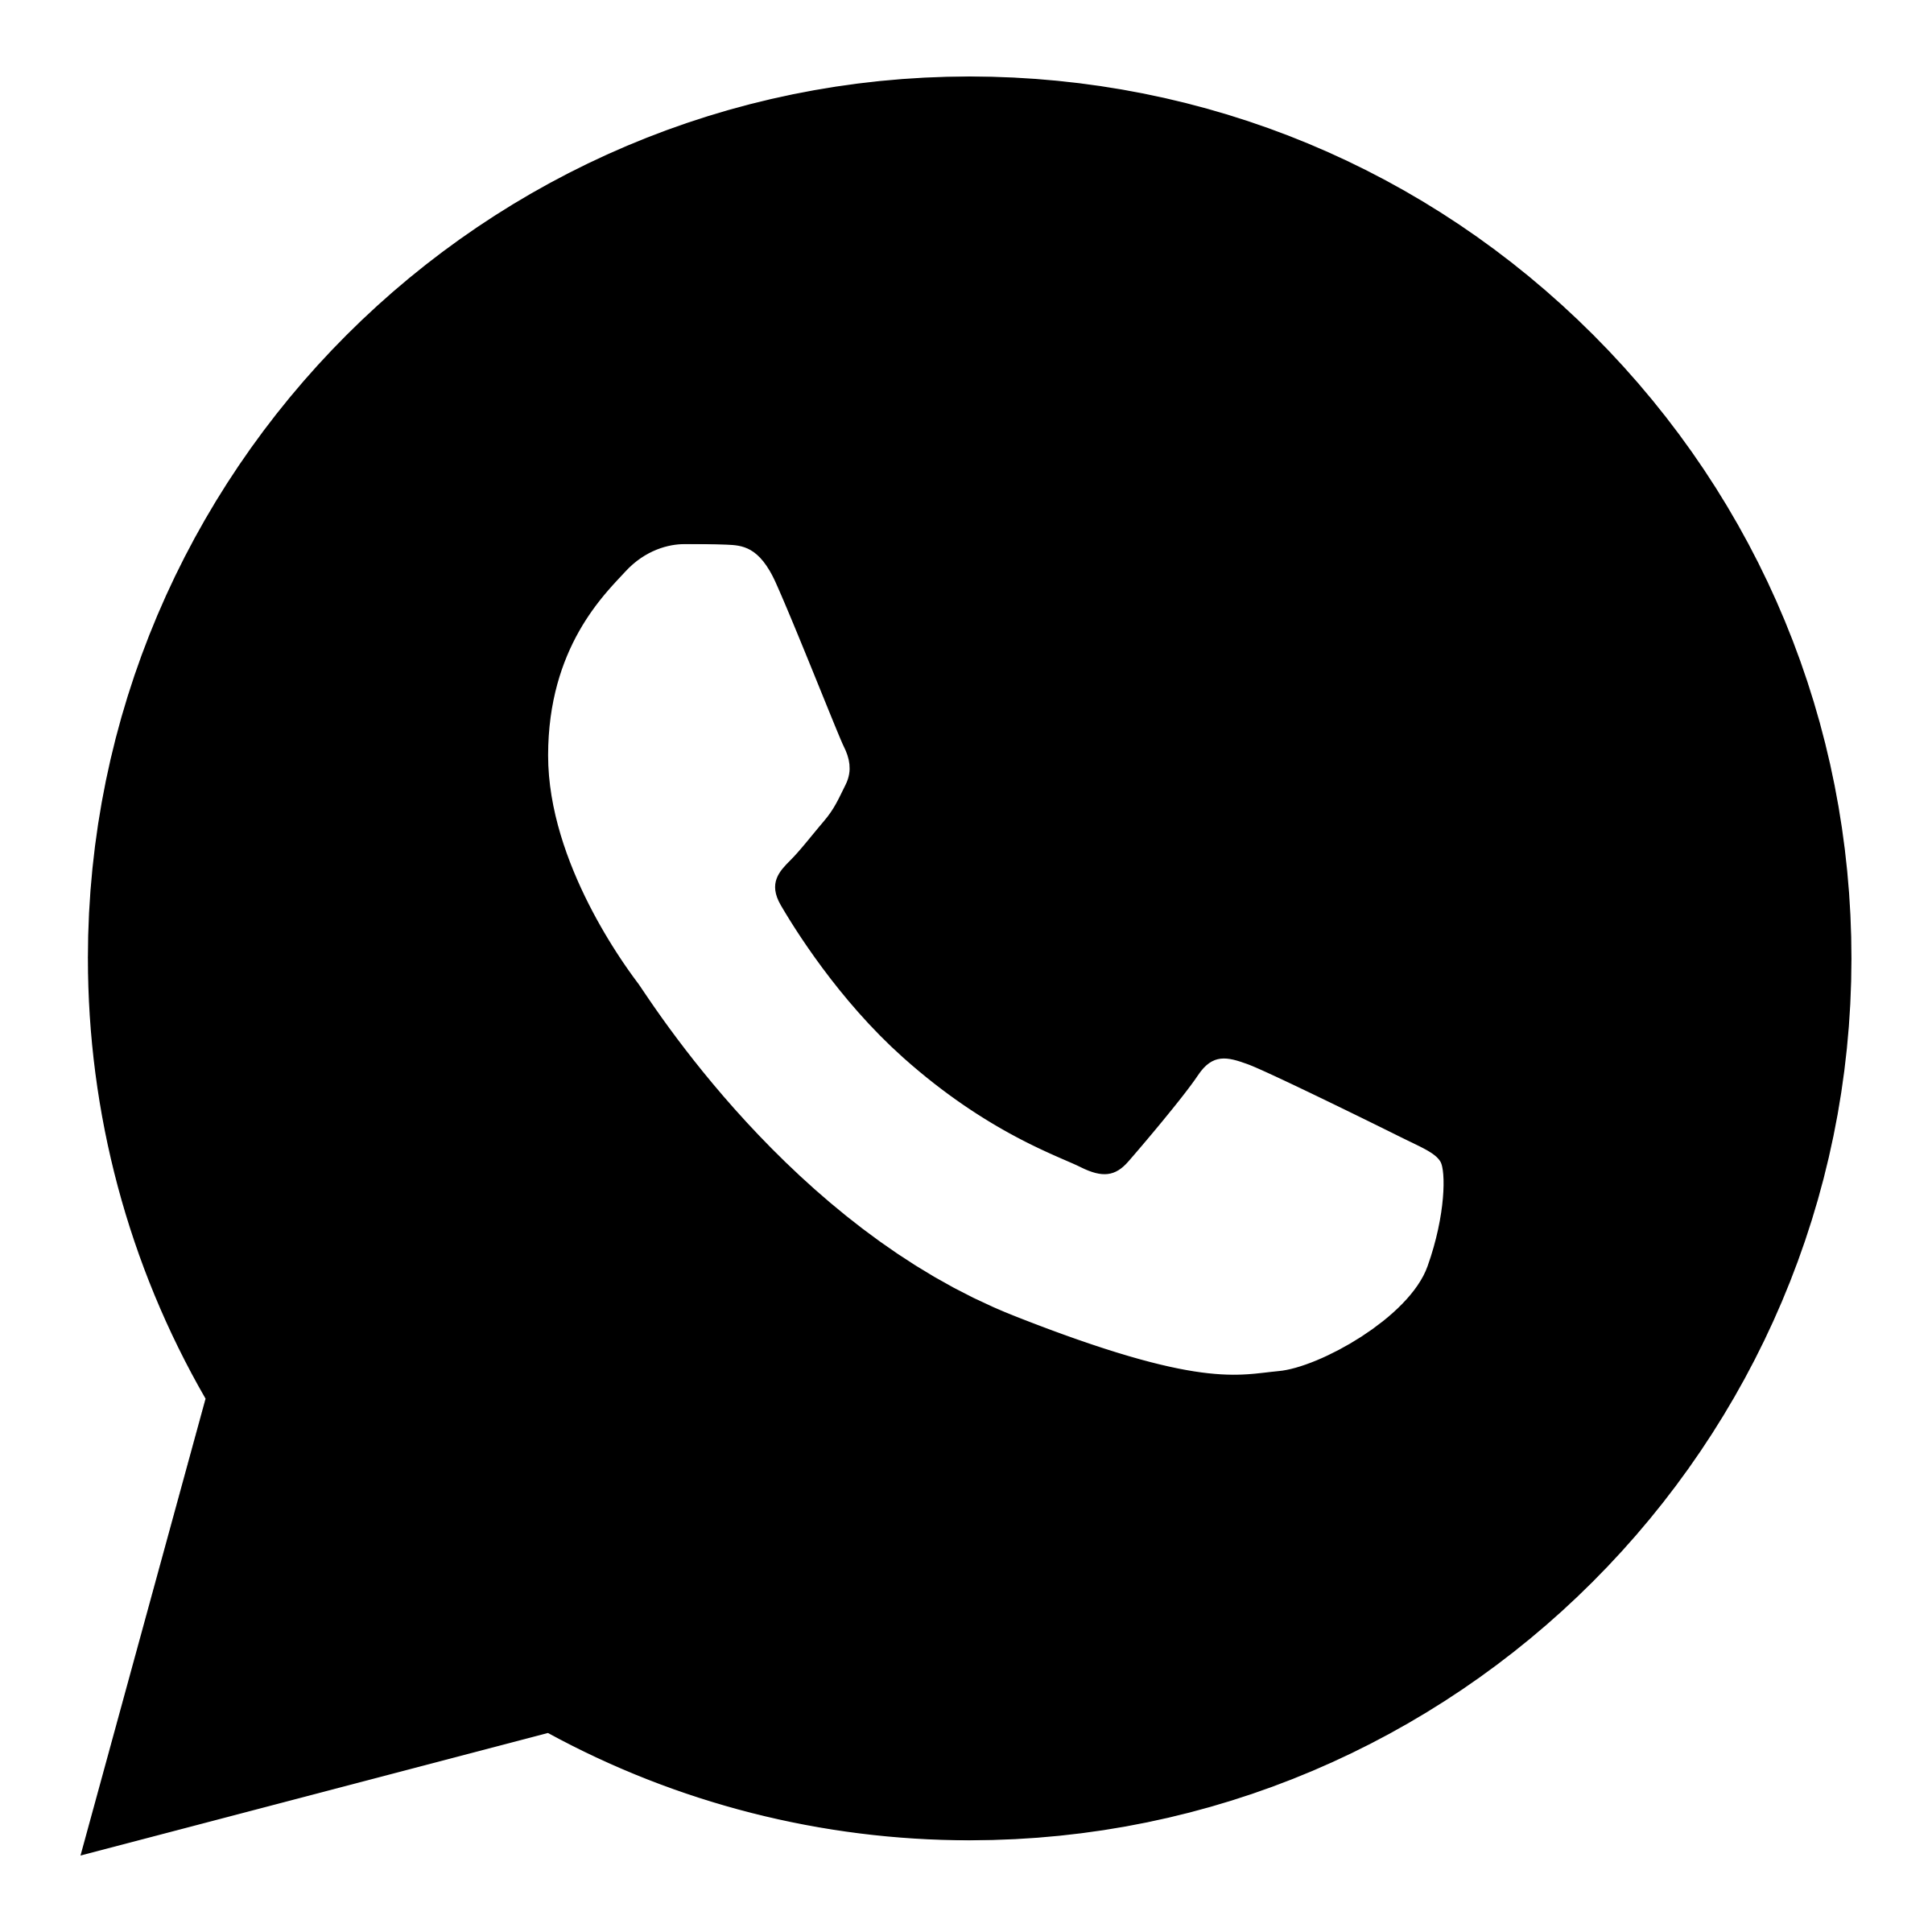 Whats App Logo - Whats app png logo 4 » PNG Image